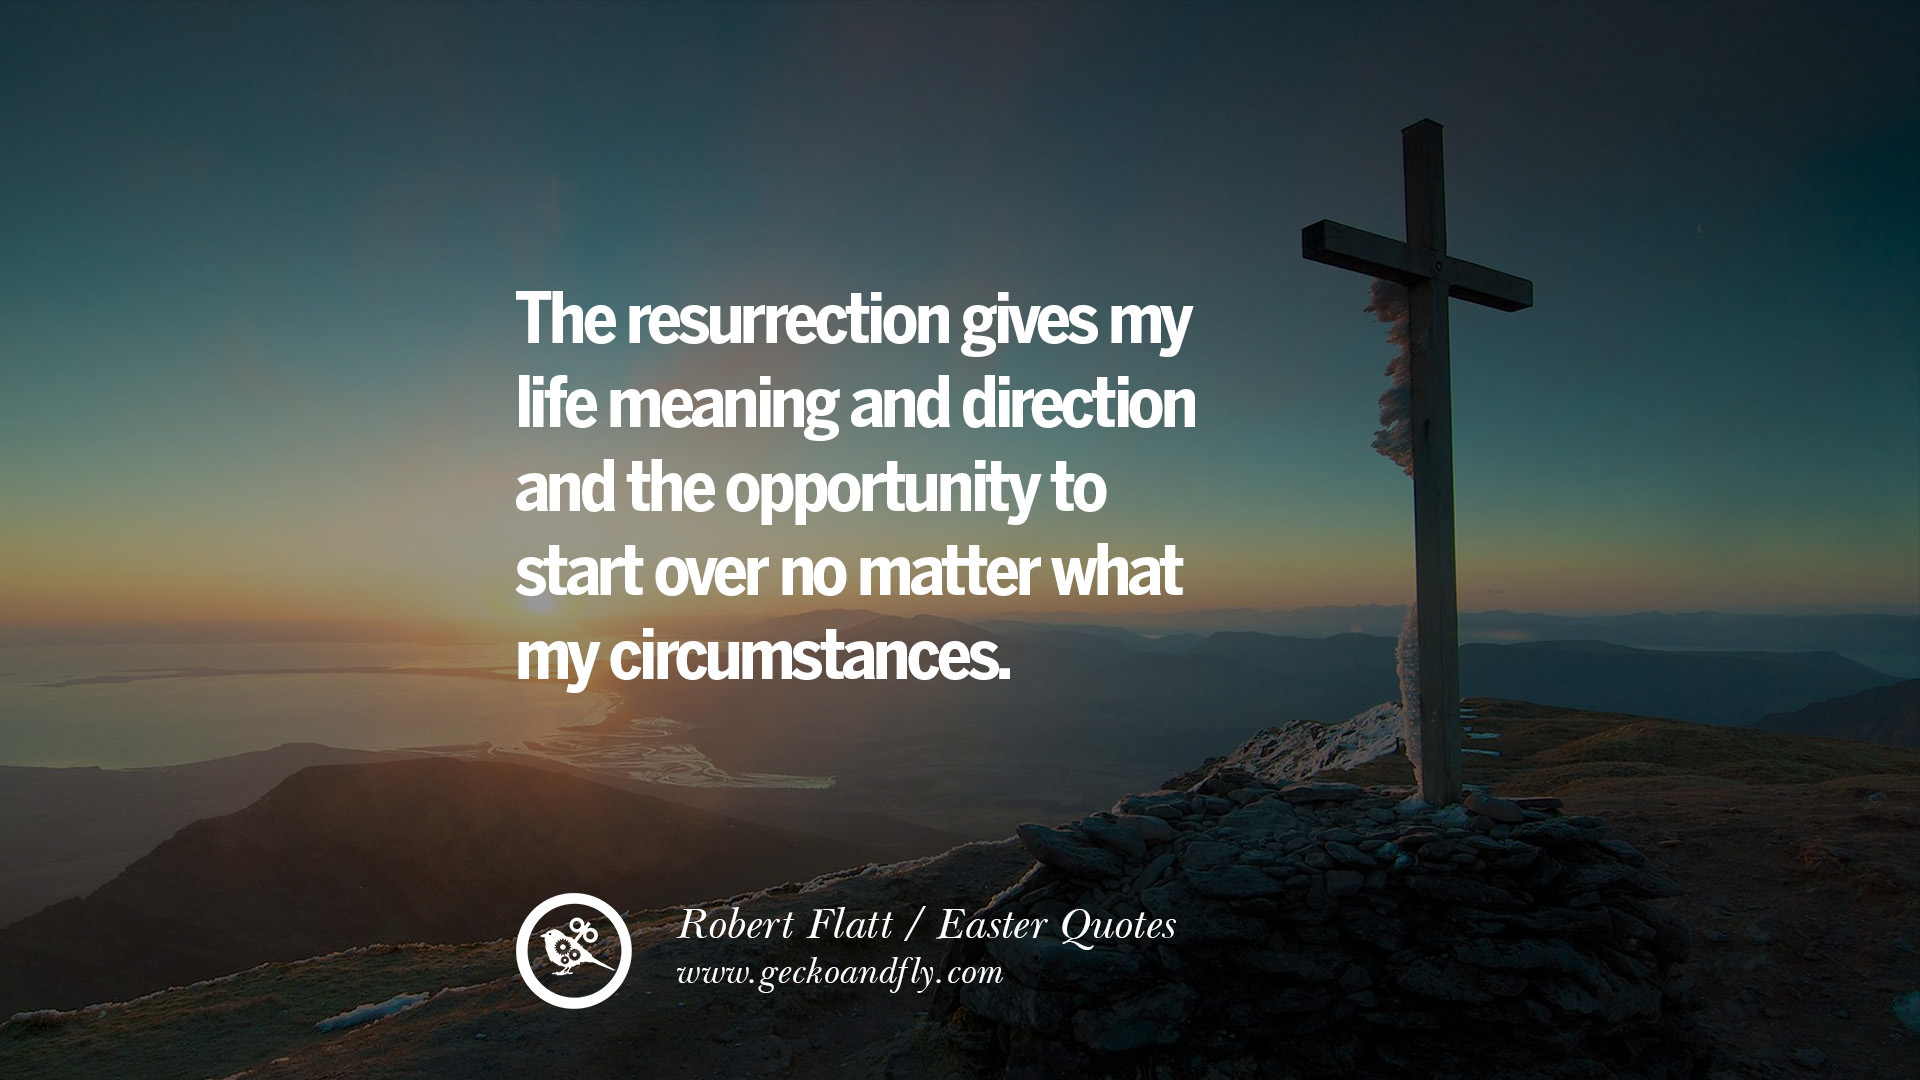 30 Happy Easter Quotes - A New Beginning And Second Chance